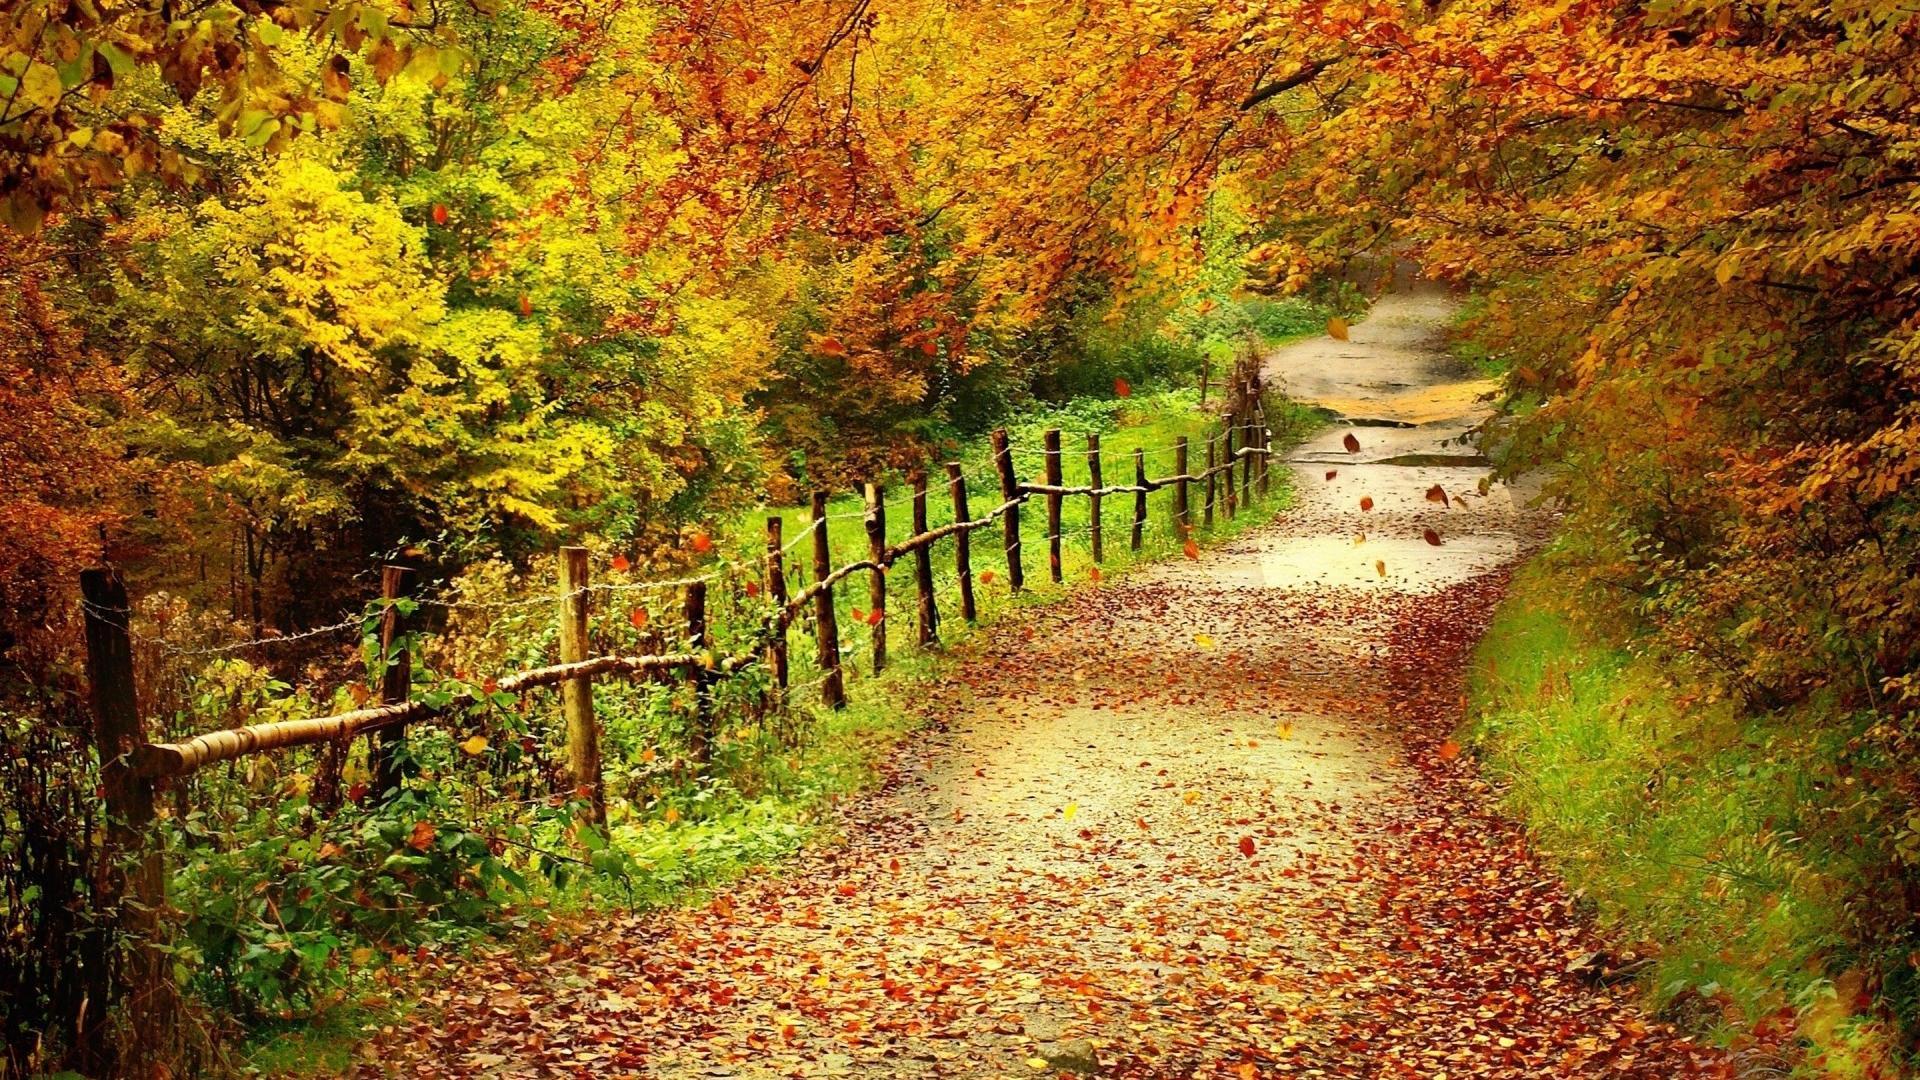 640x1136 Country Road in Autumn Iphone 5 wallpaper